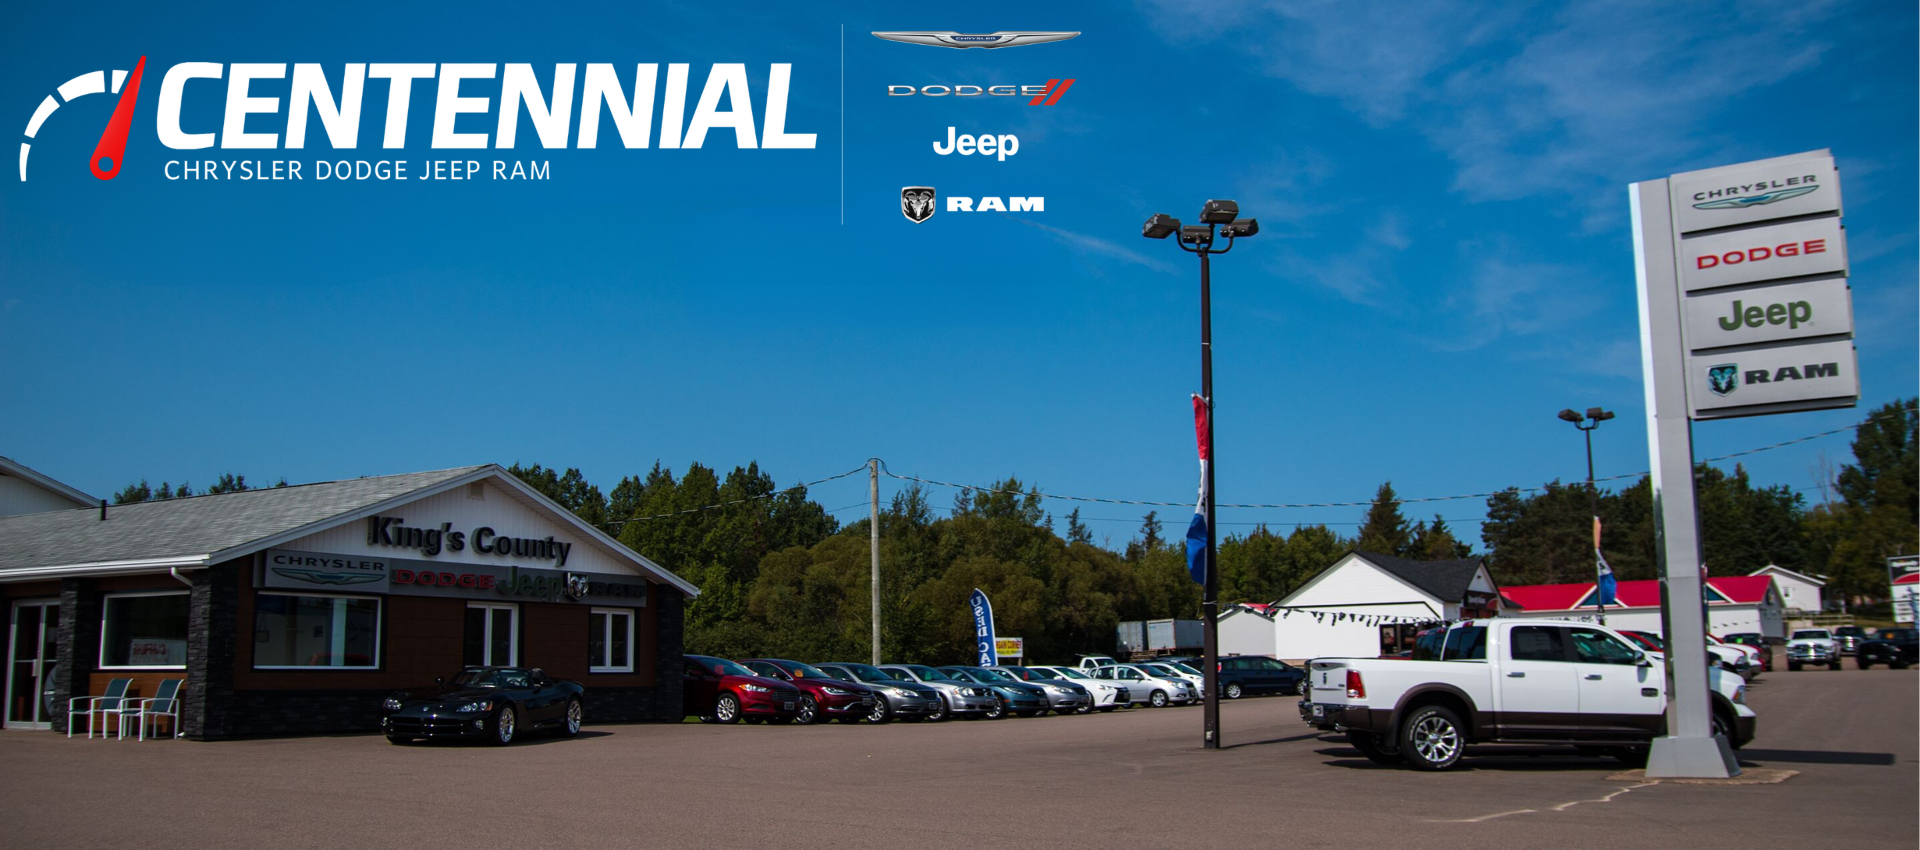 Expansion Alert: PEI Is Now Home To Centennial Chrysler Dodge Jeep Ram